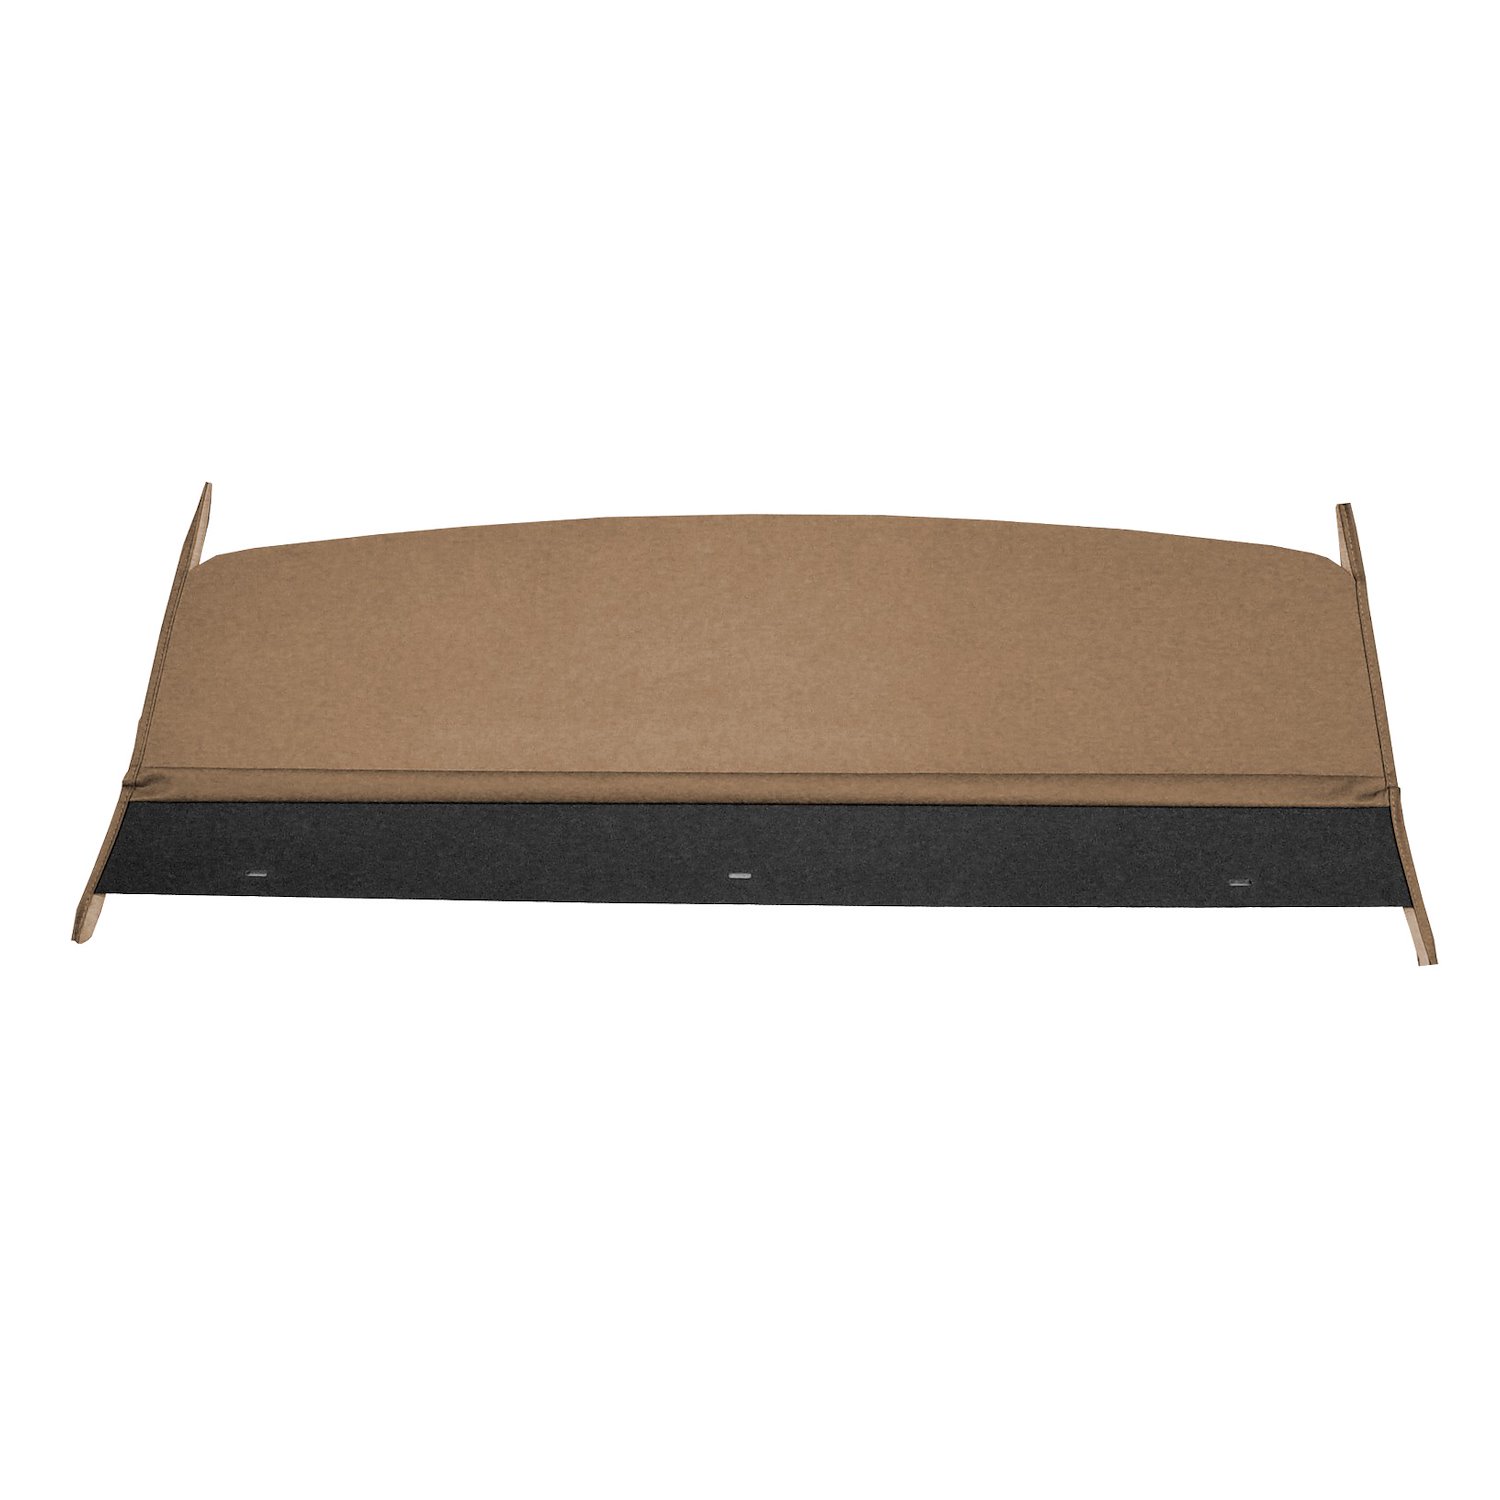 PT63CL206N 63 DART HARDTOP PACKAGE TRAY WITHOUT SPEAKER CUTS - TAUPE